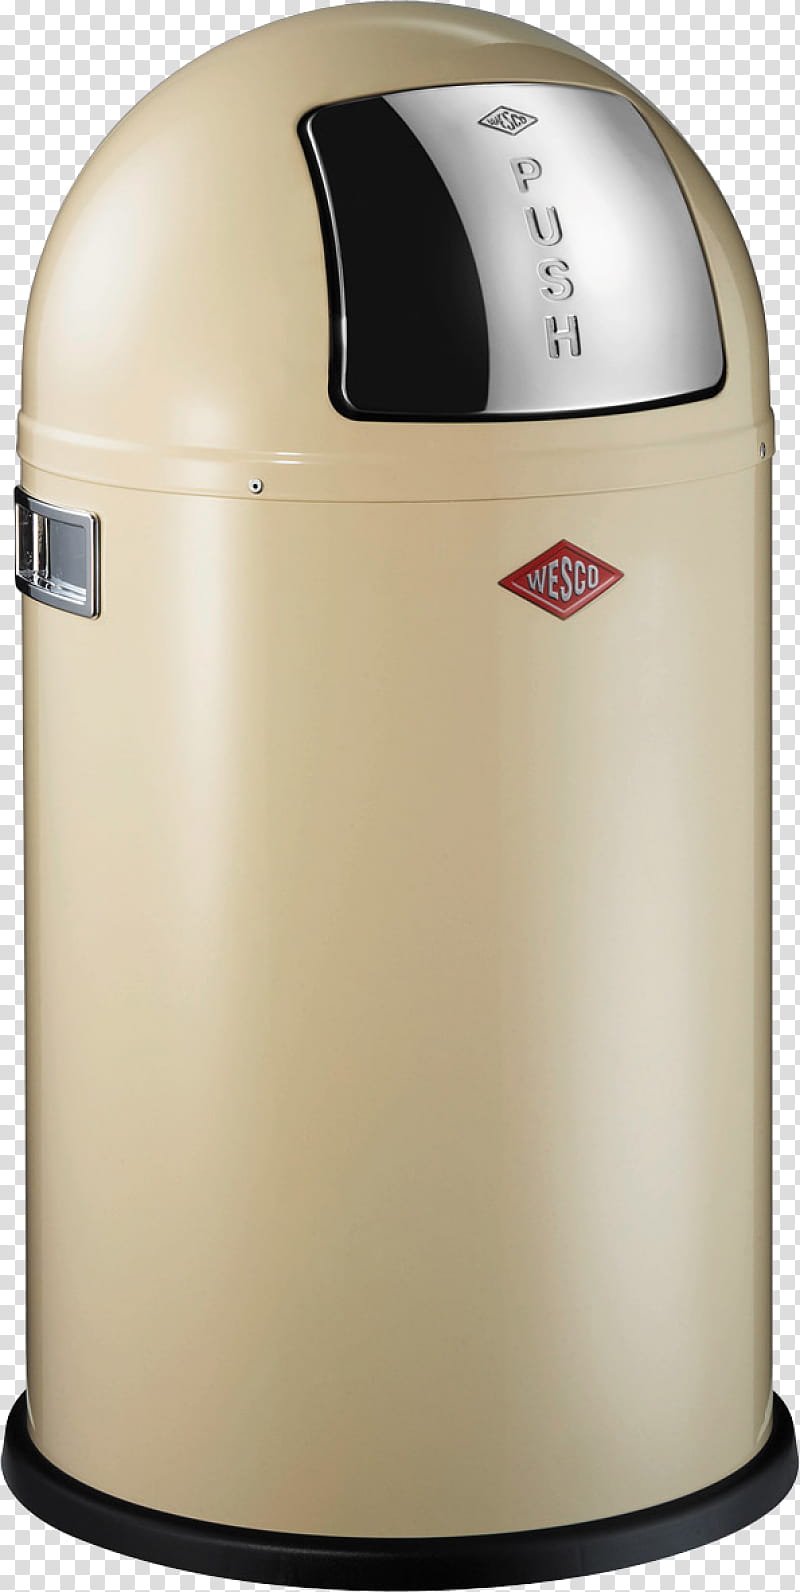 Kitchen, Pushboy 114 Gallon Swing Top Trash Can Wesco, Wesco Pushboy Junior 175, Spaceboy Waste Bin Wesco, Wesco Kickboy Waste Can, Pedal Bin, Kickmaster Waste Bin Wesco, Wesco Kickboy Bin transparent background PNG clipart